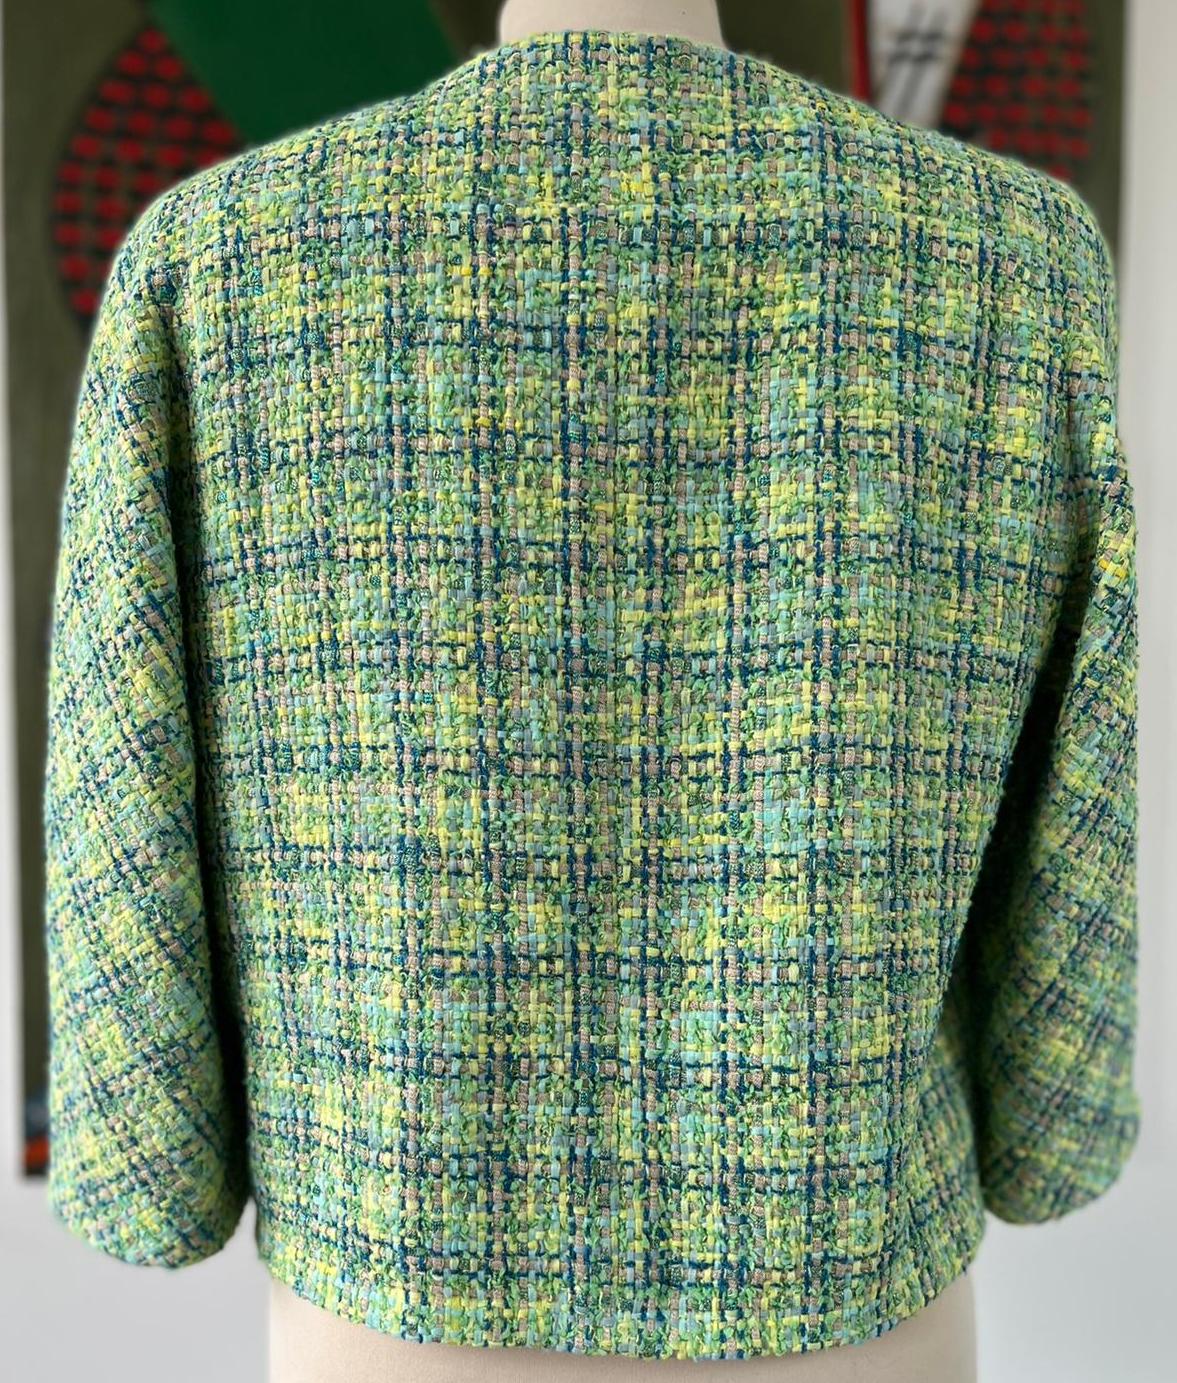 CHANEL 2019 Tweed Jacket Lime Green Spring Collection Chelsea Vintage